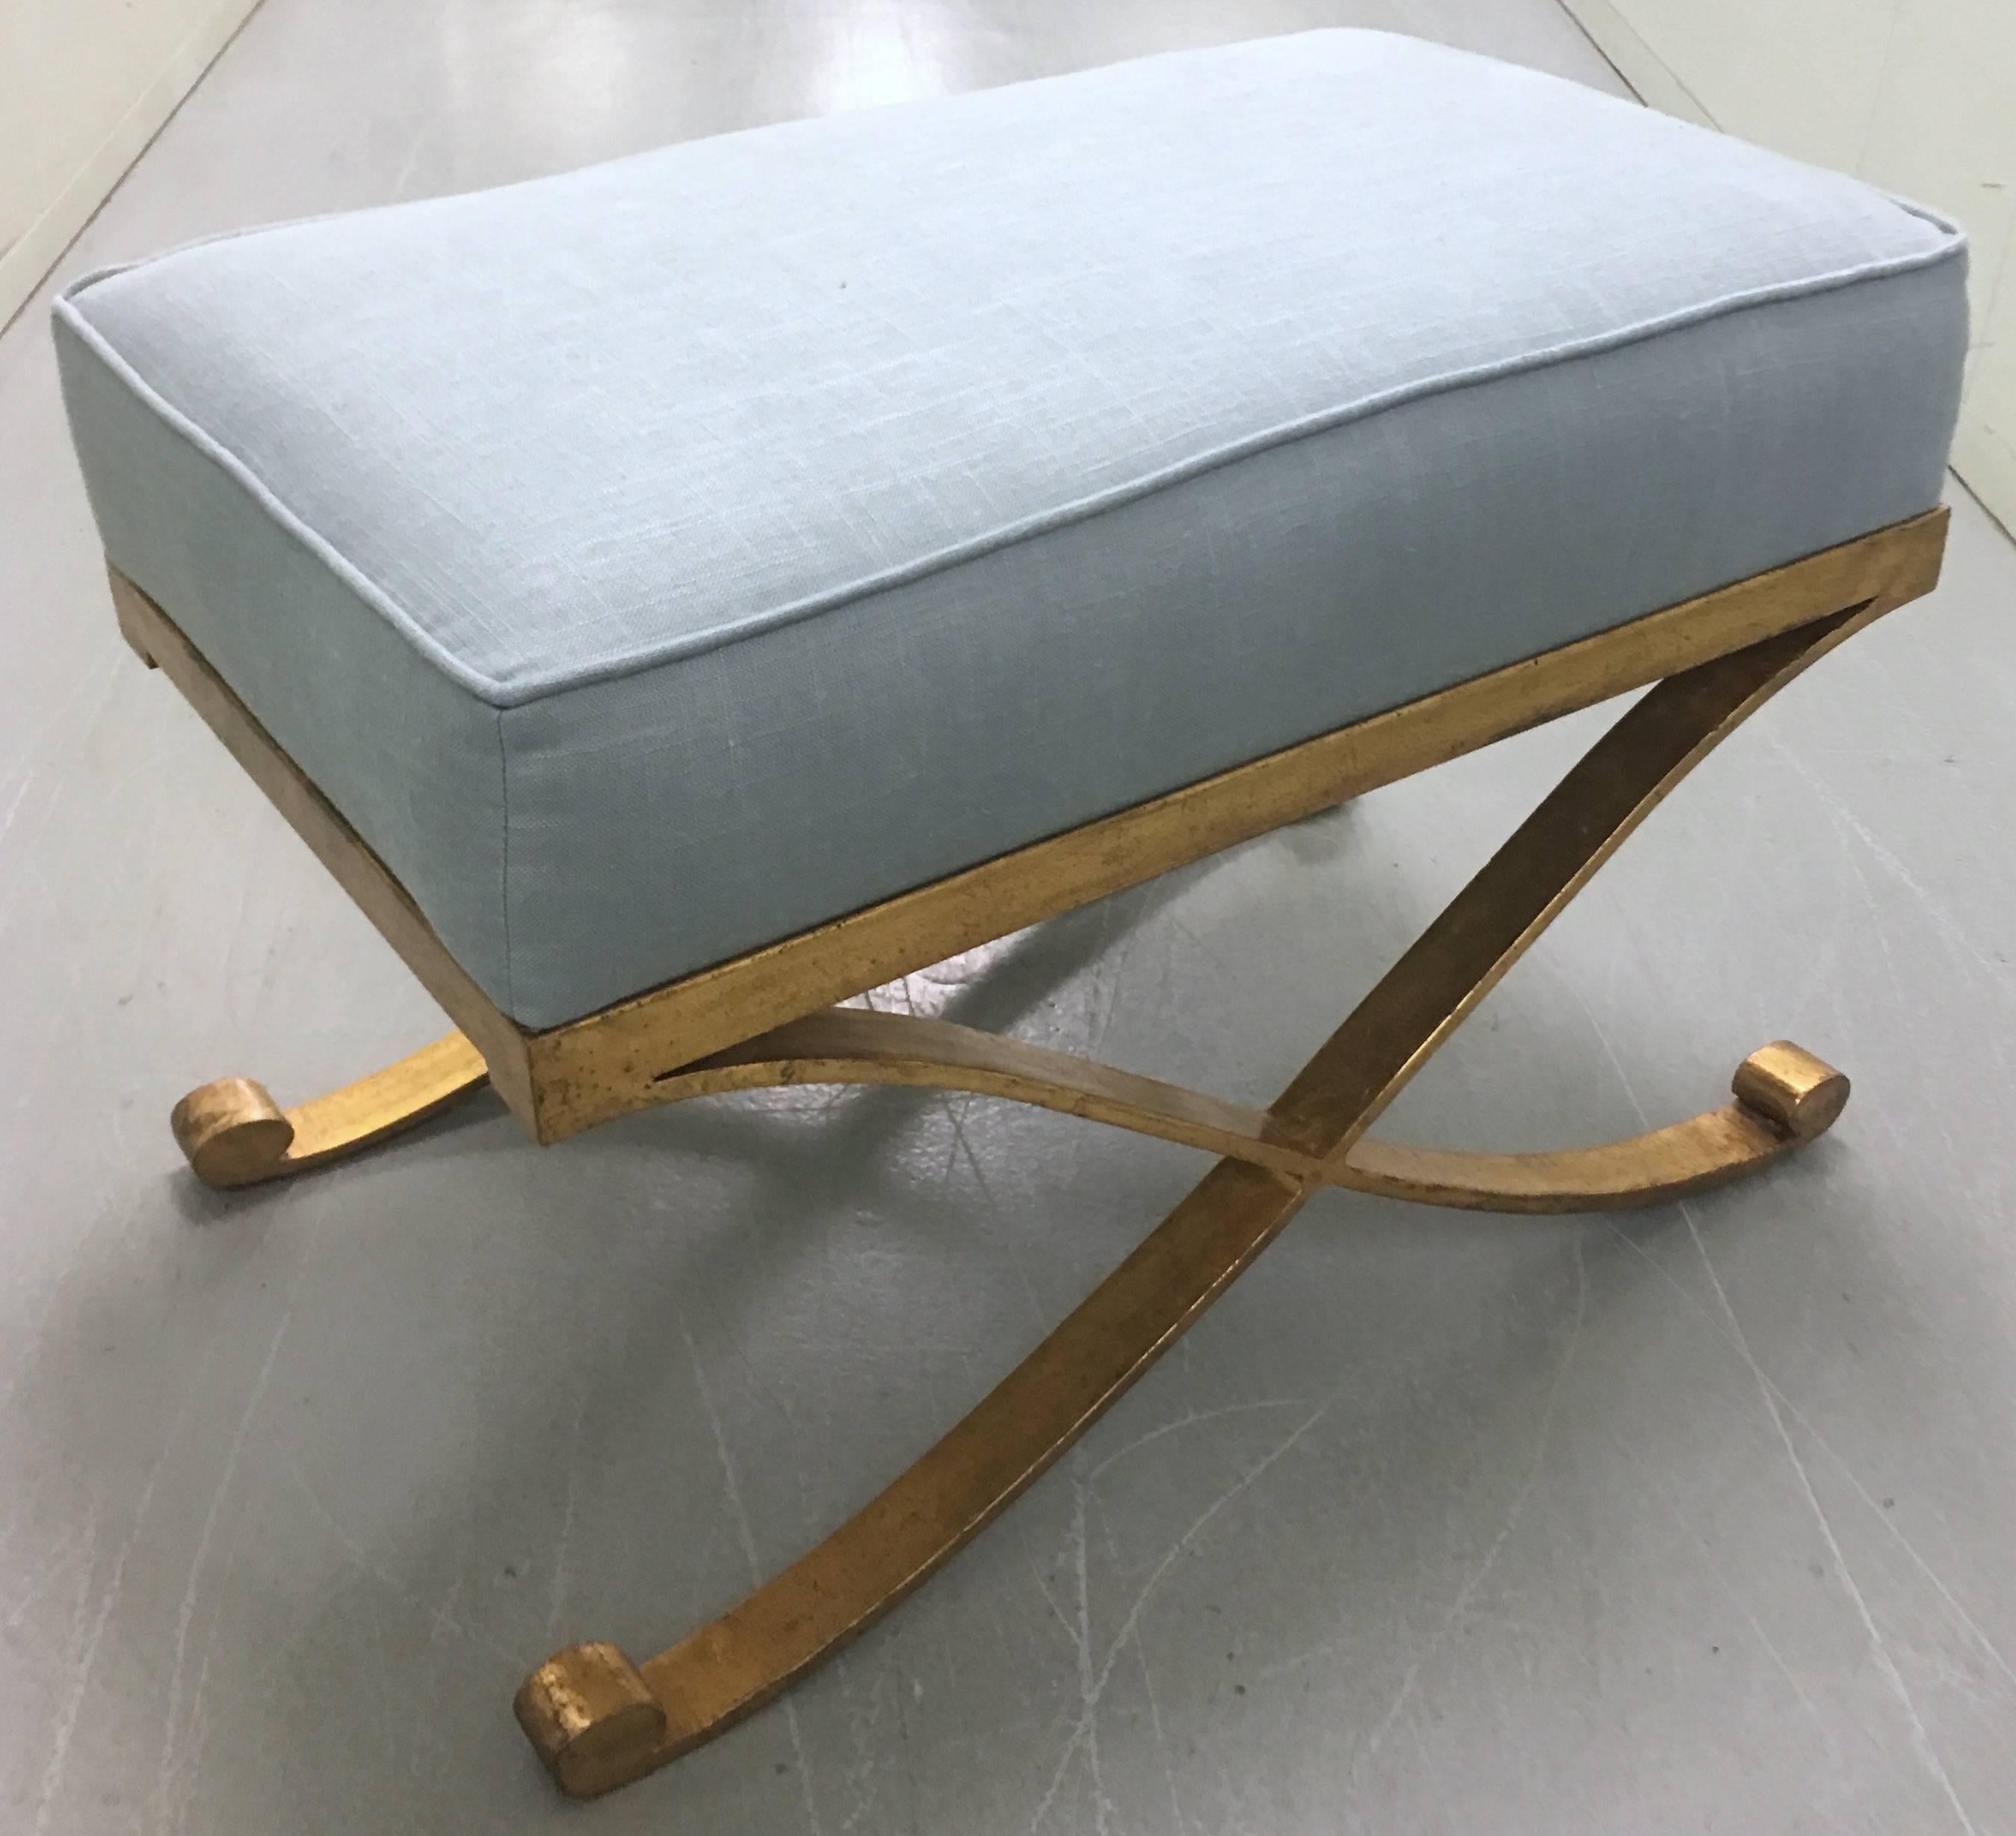 Hammered brass bench by Mastercraft for Baker. In the style of Raymond Subes. Newly upholstered in light blue linen fabric by Rogers & Goffigon. Very heavy solid brass construction with lightly hammered finish. Stool retains Baker label.